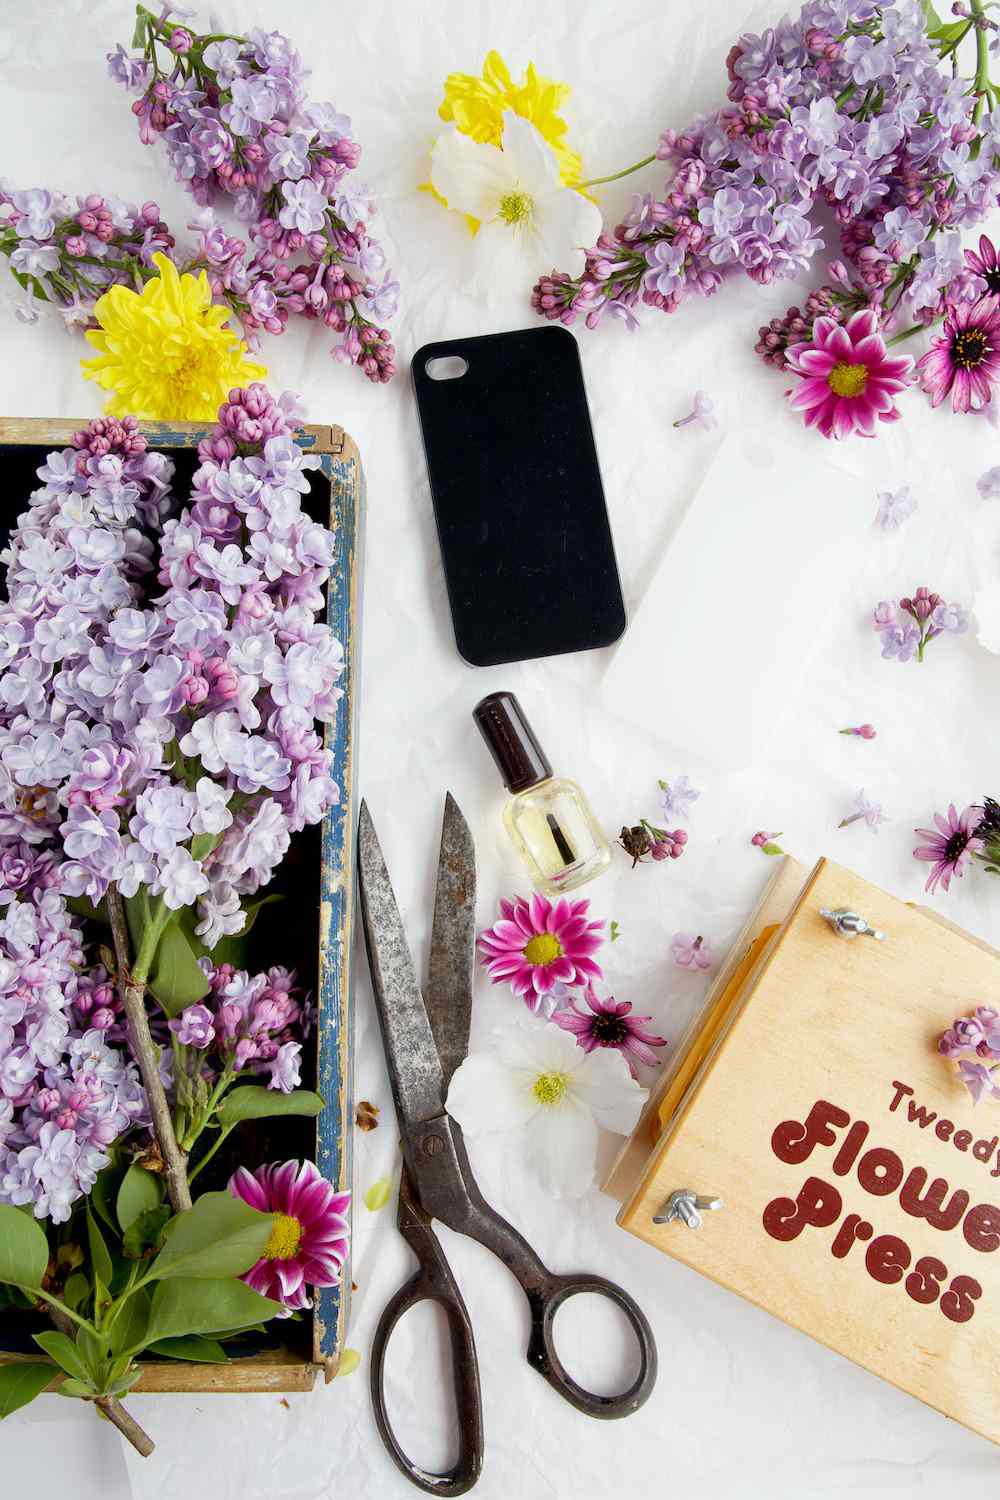 Phone case surrounded with flowers